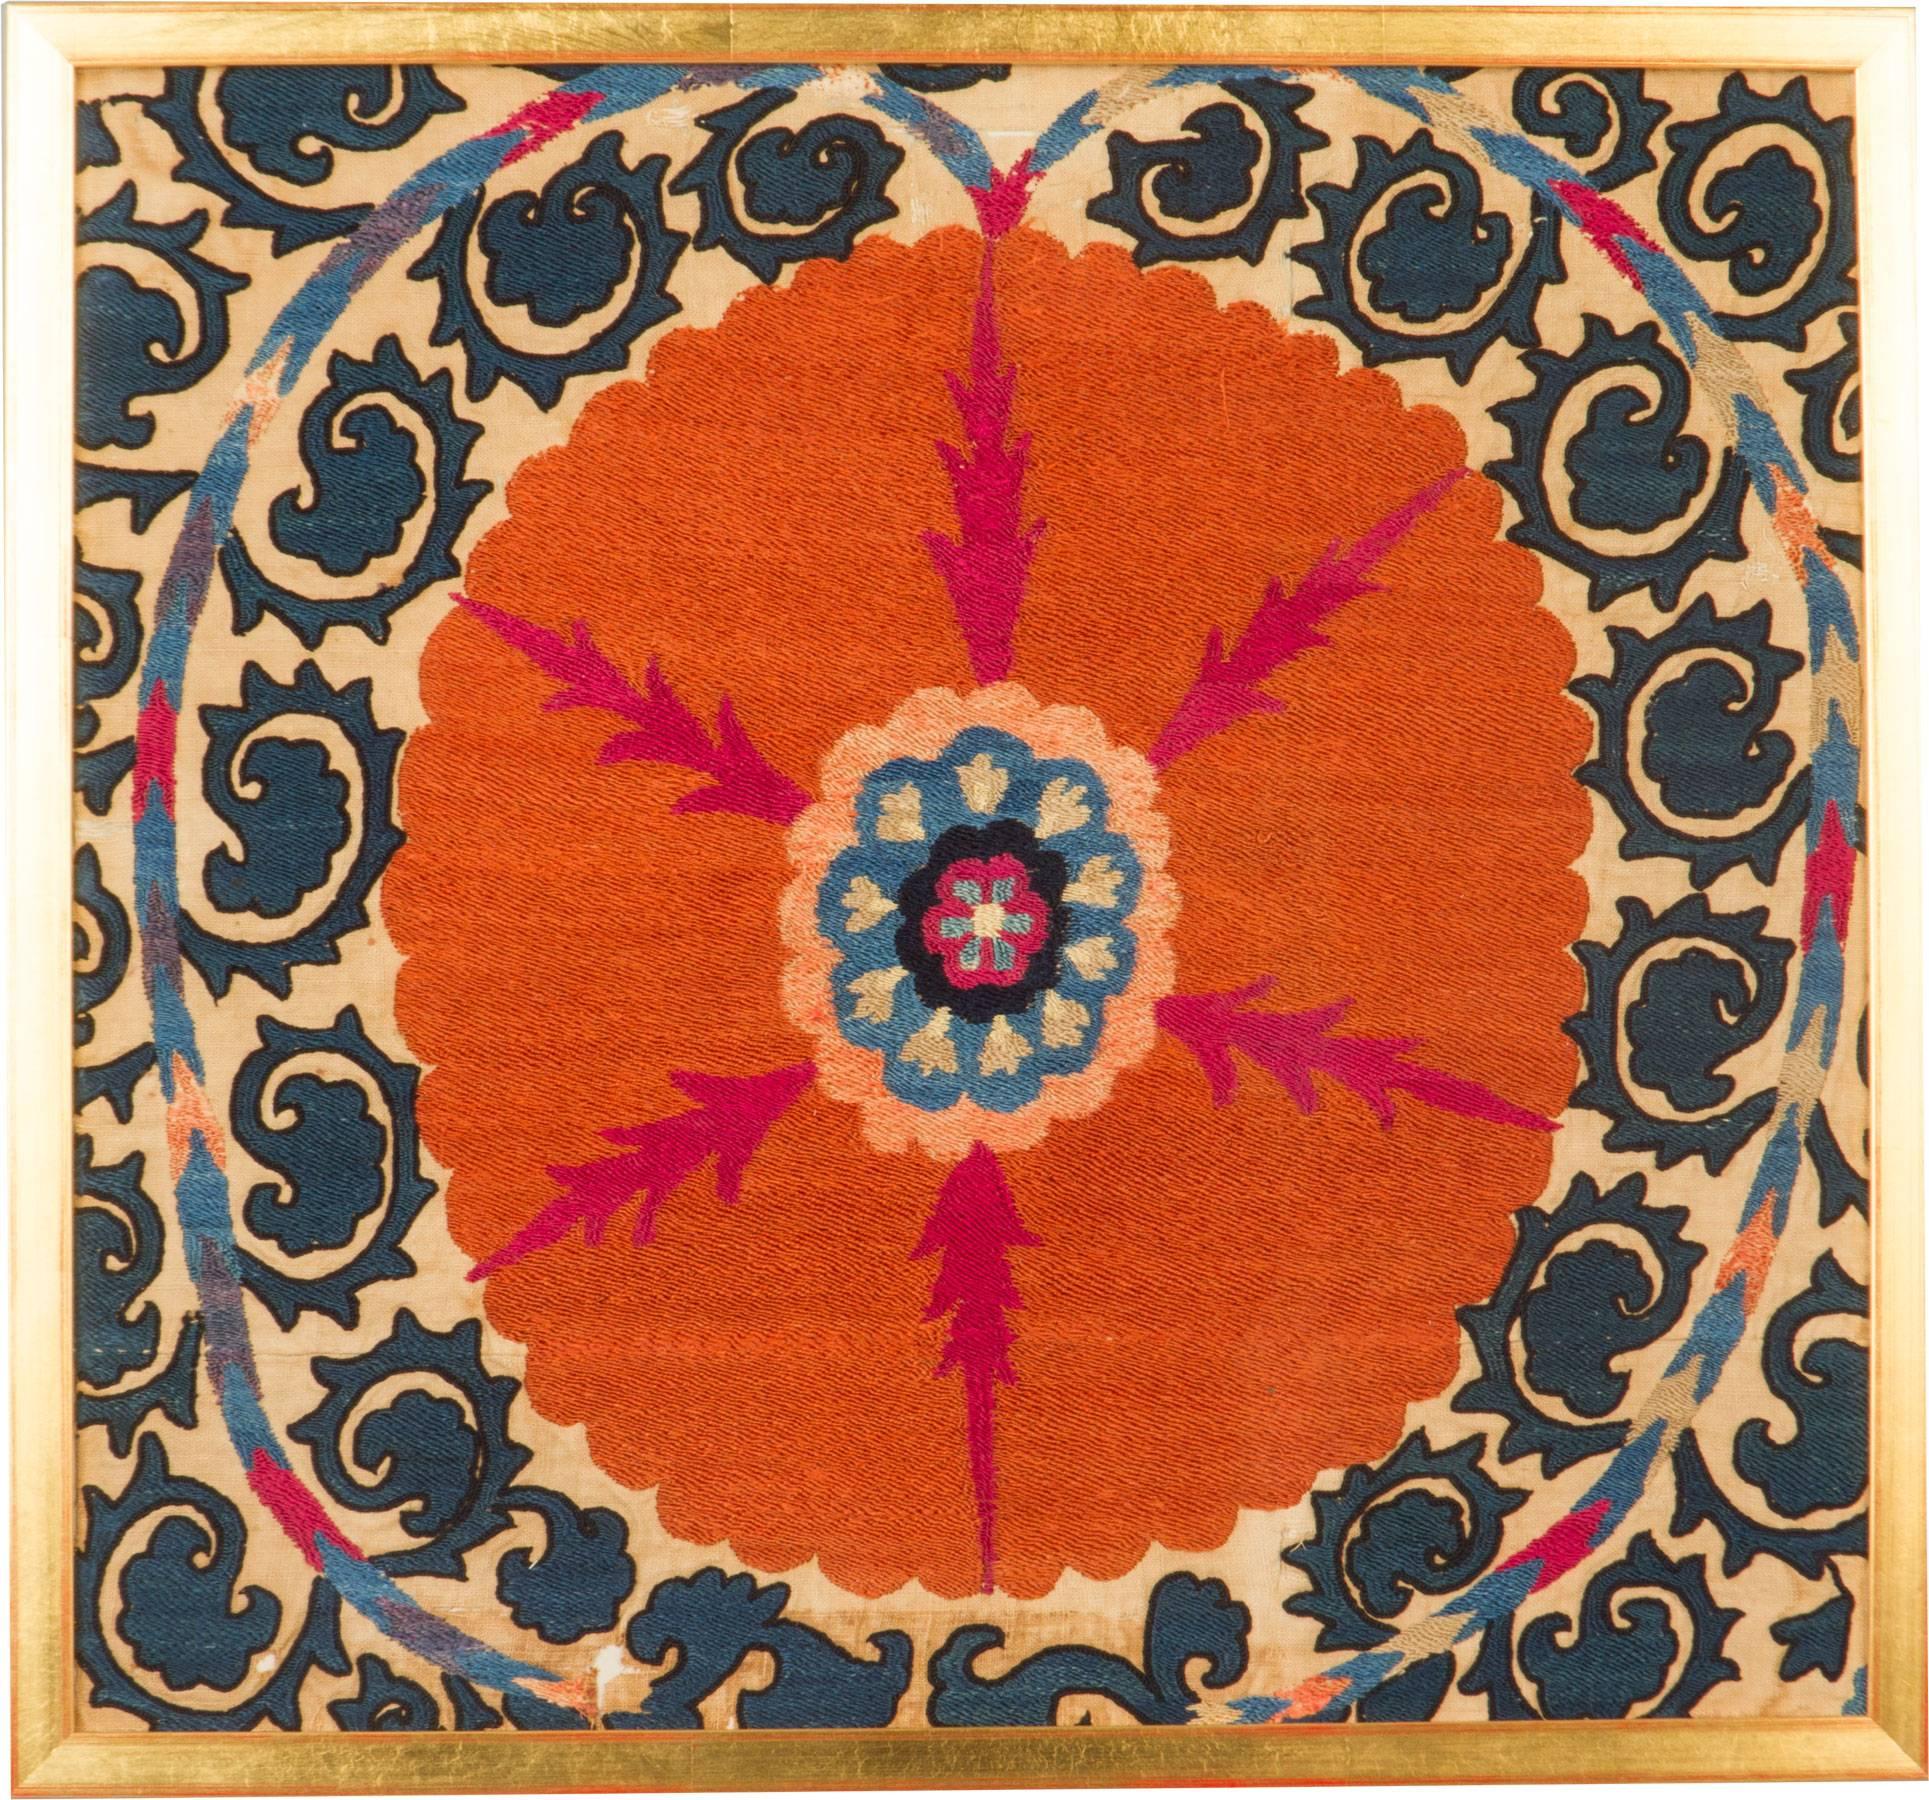 This is a bold example of one element of a Suzani textile.